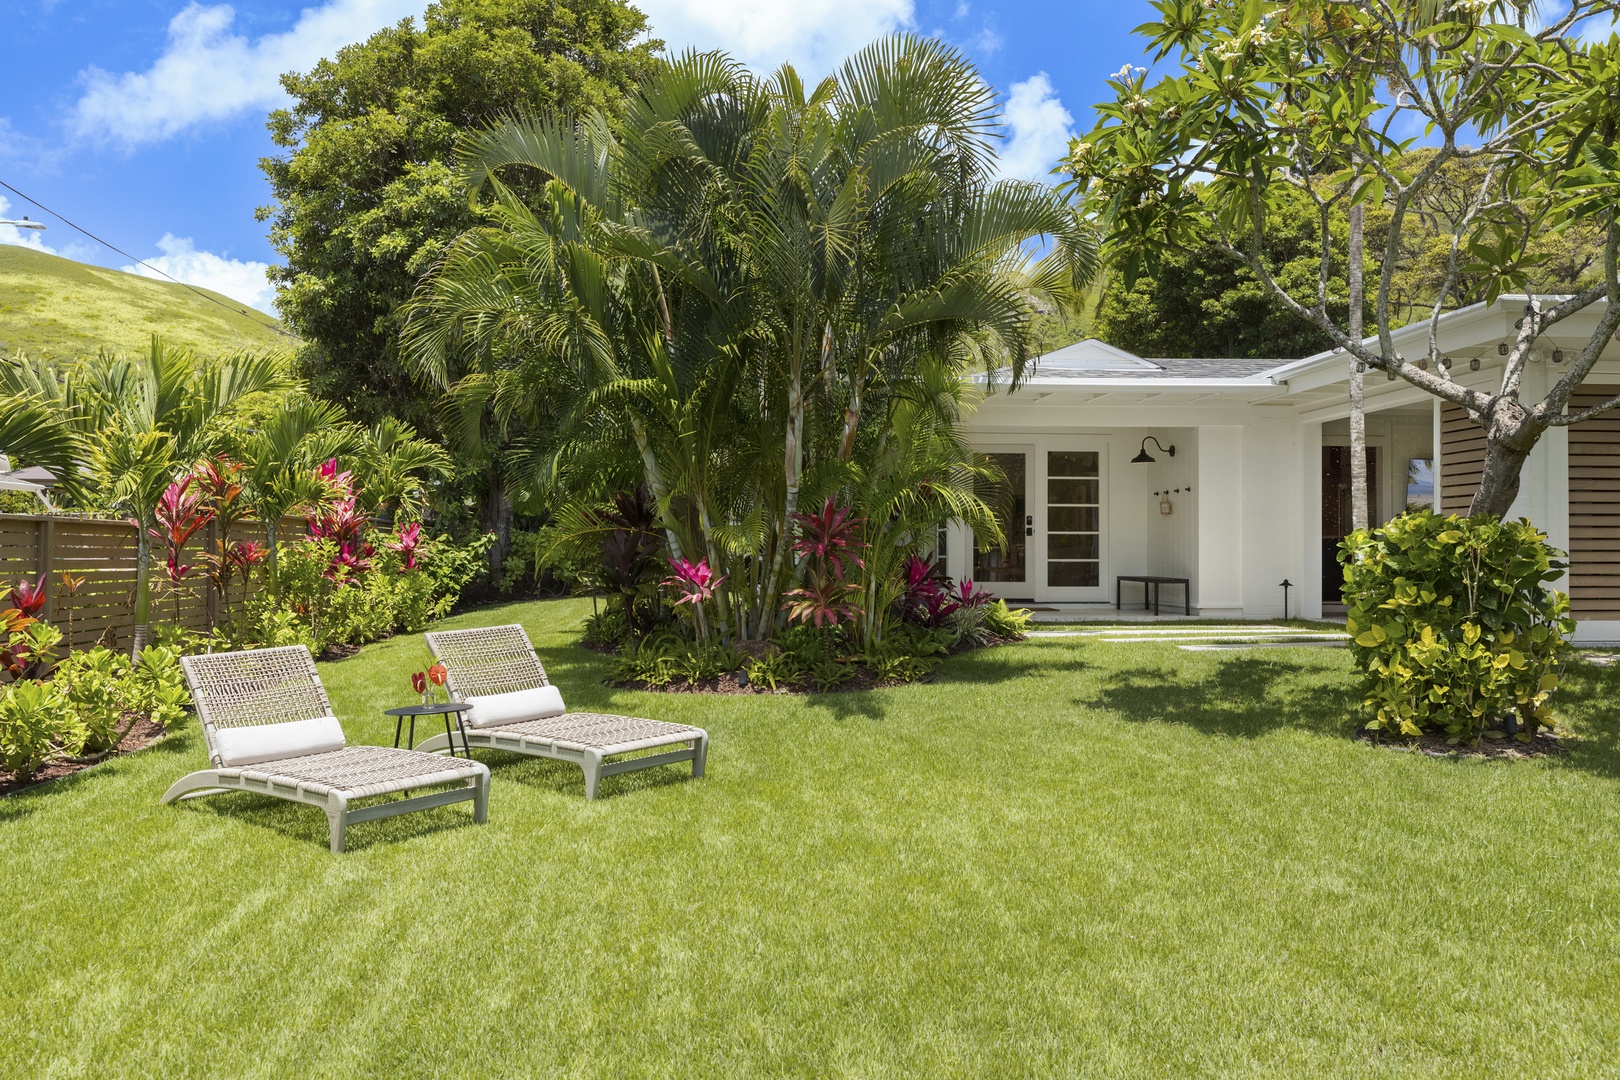 Kailua Vacation Rentals, Lanikai Hideaway - Private and professionally landscaped yard